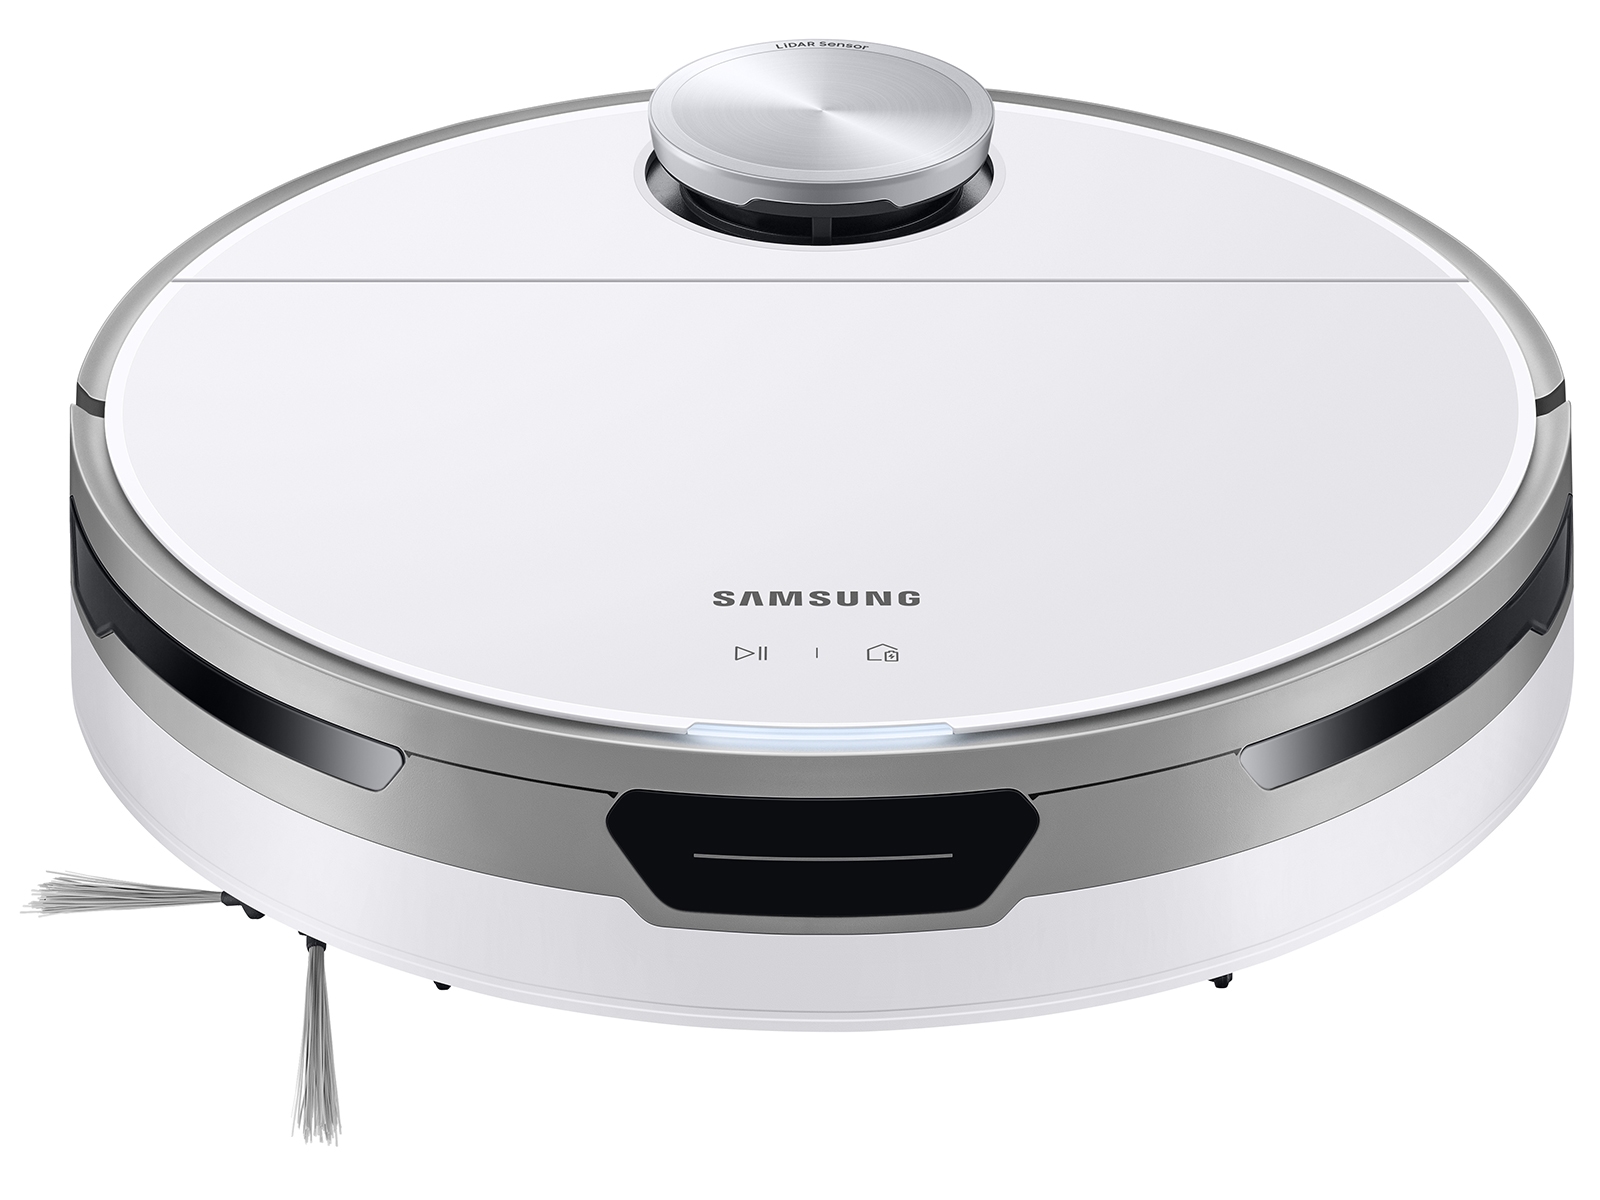 SAMSUNG Jet Bot Robot Vacuum with Intelligent Power Control - image 1 of 8